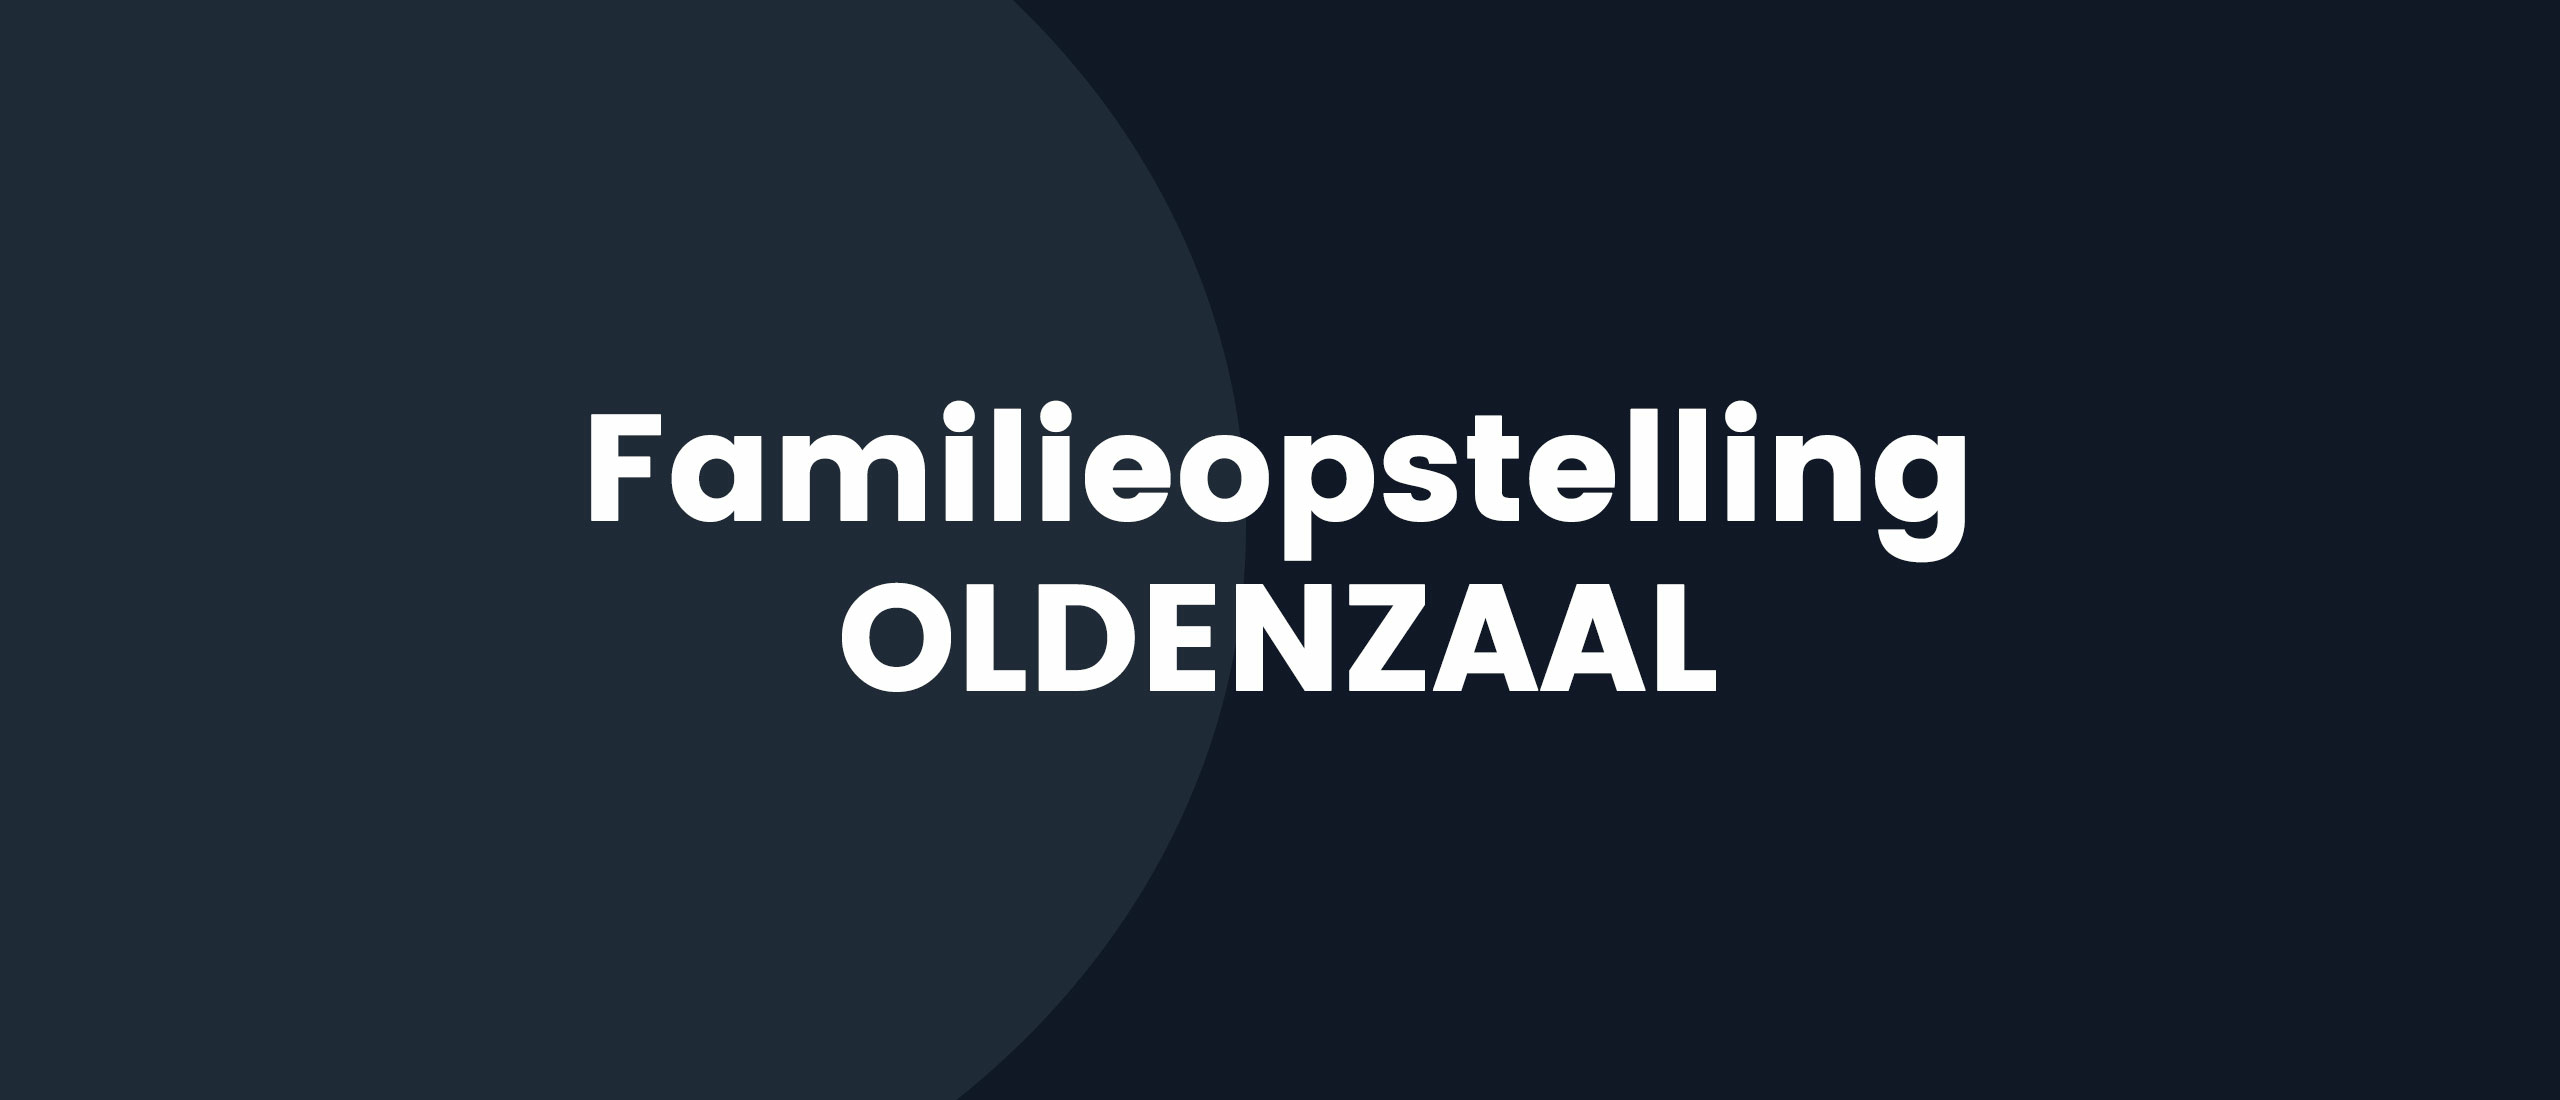 Familieopstelling Oldenzaal